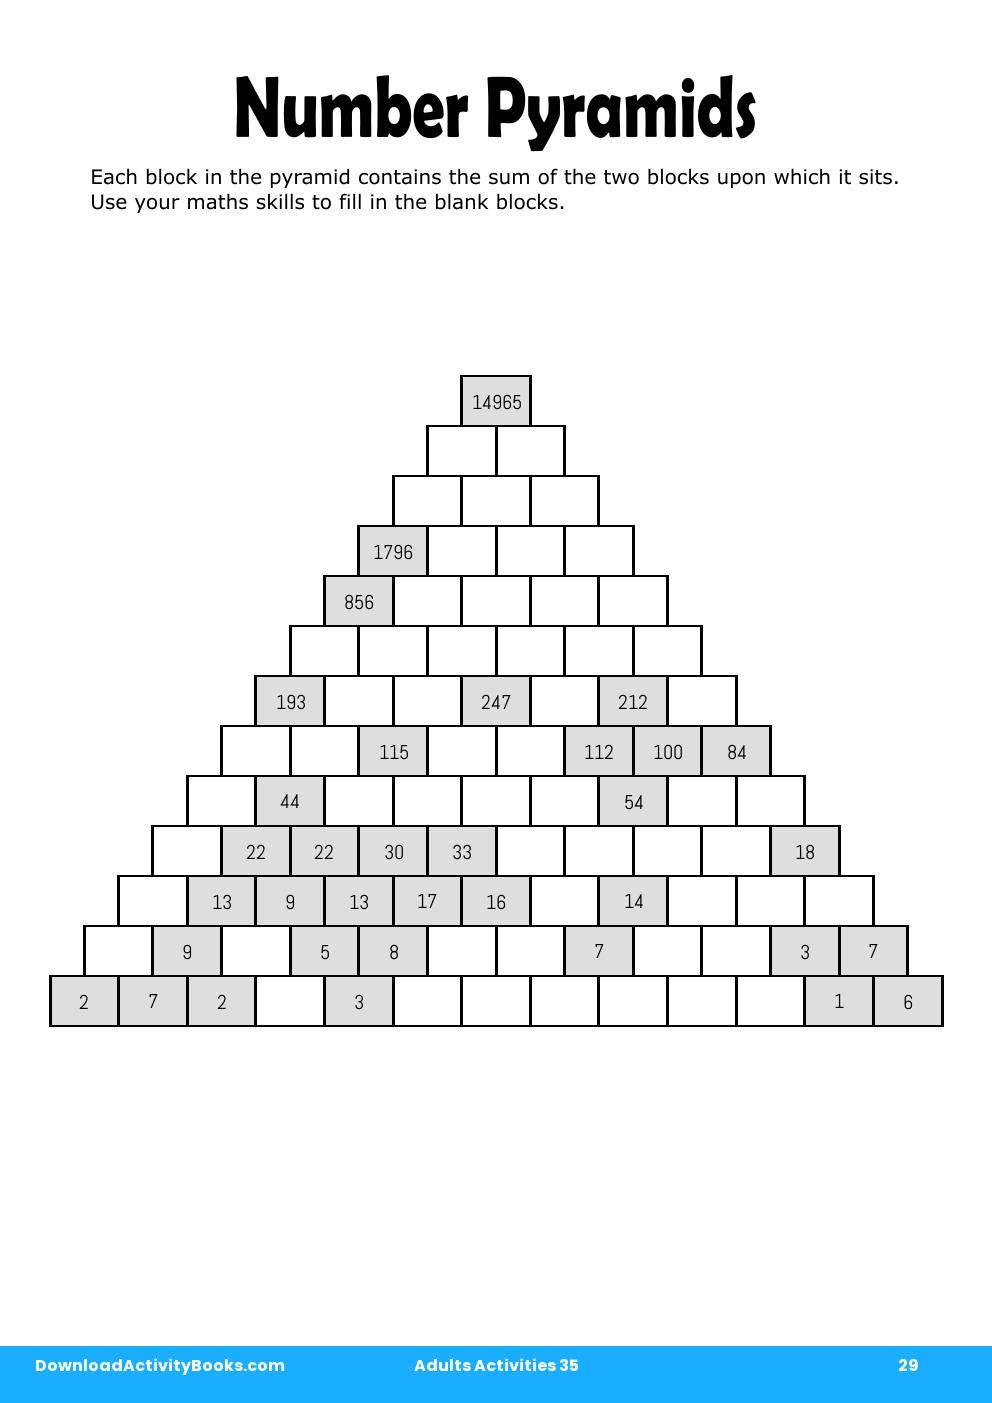 Number Pyramids in Adults Activities 35